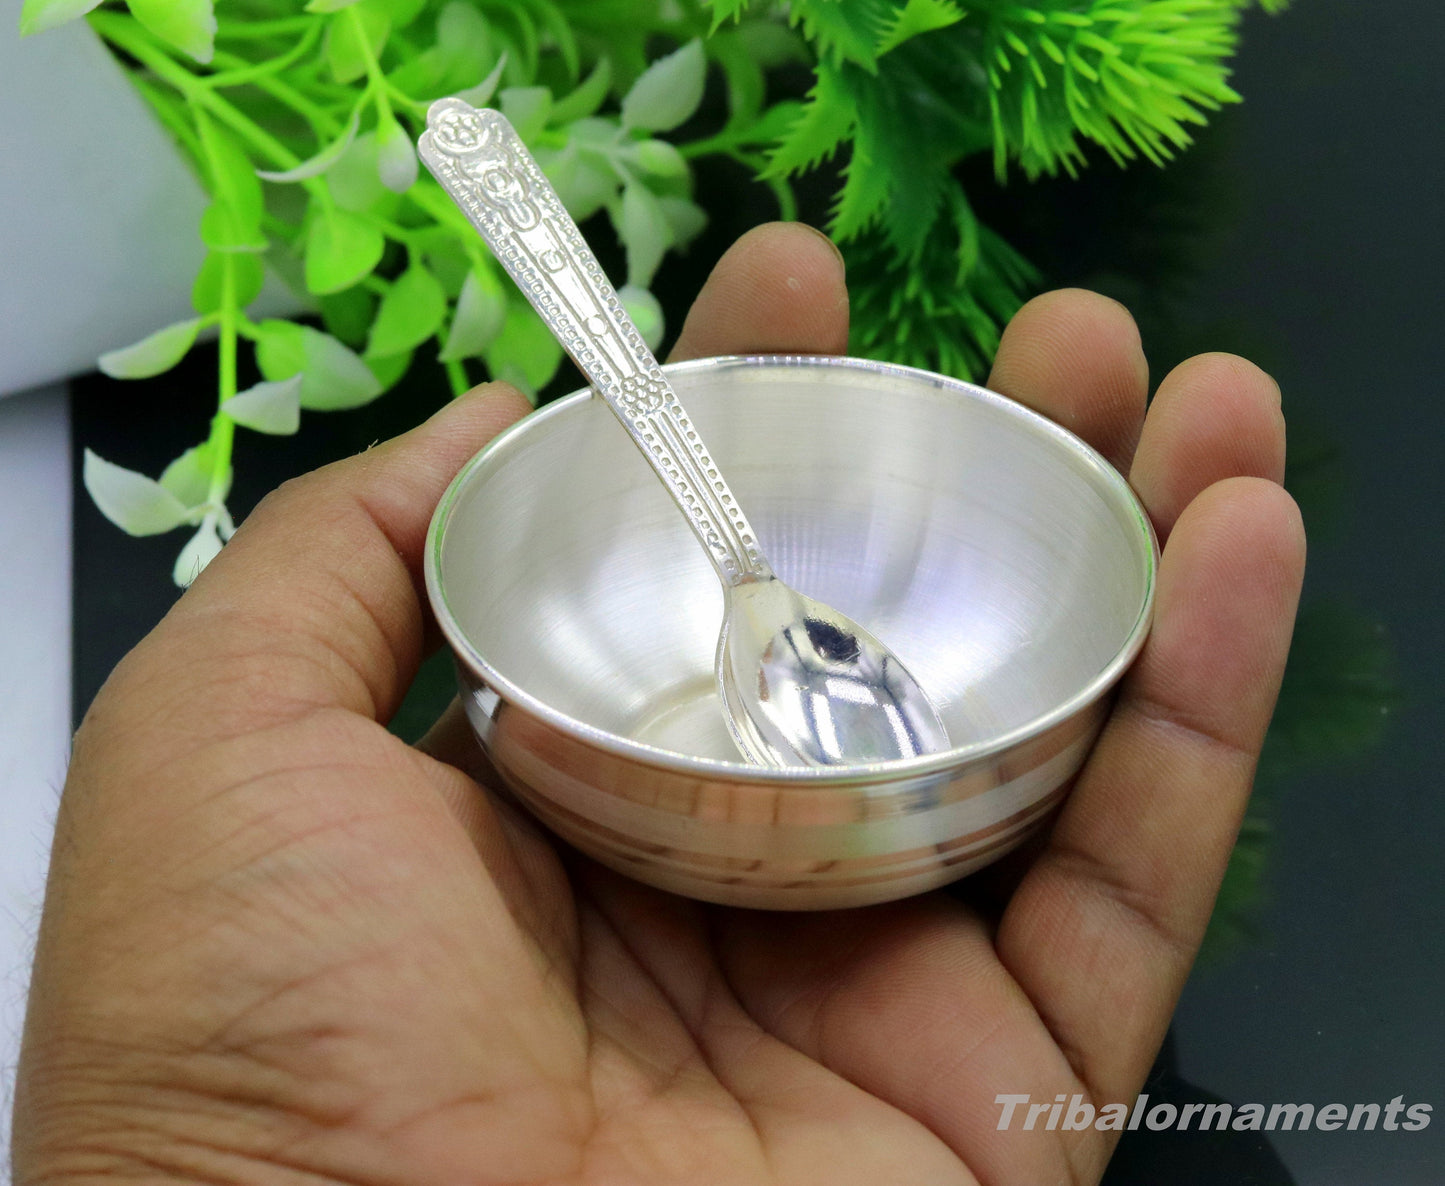 999 fine solid silver handmade small bowl for baby food, pure silver vessels, silver utensils, home and kitchen accessories india sv30 - TRIBAL ORNAMENTS